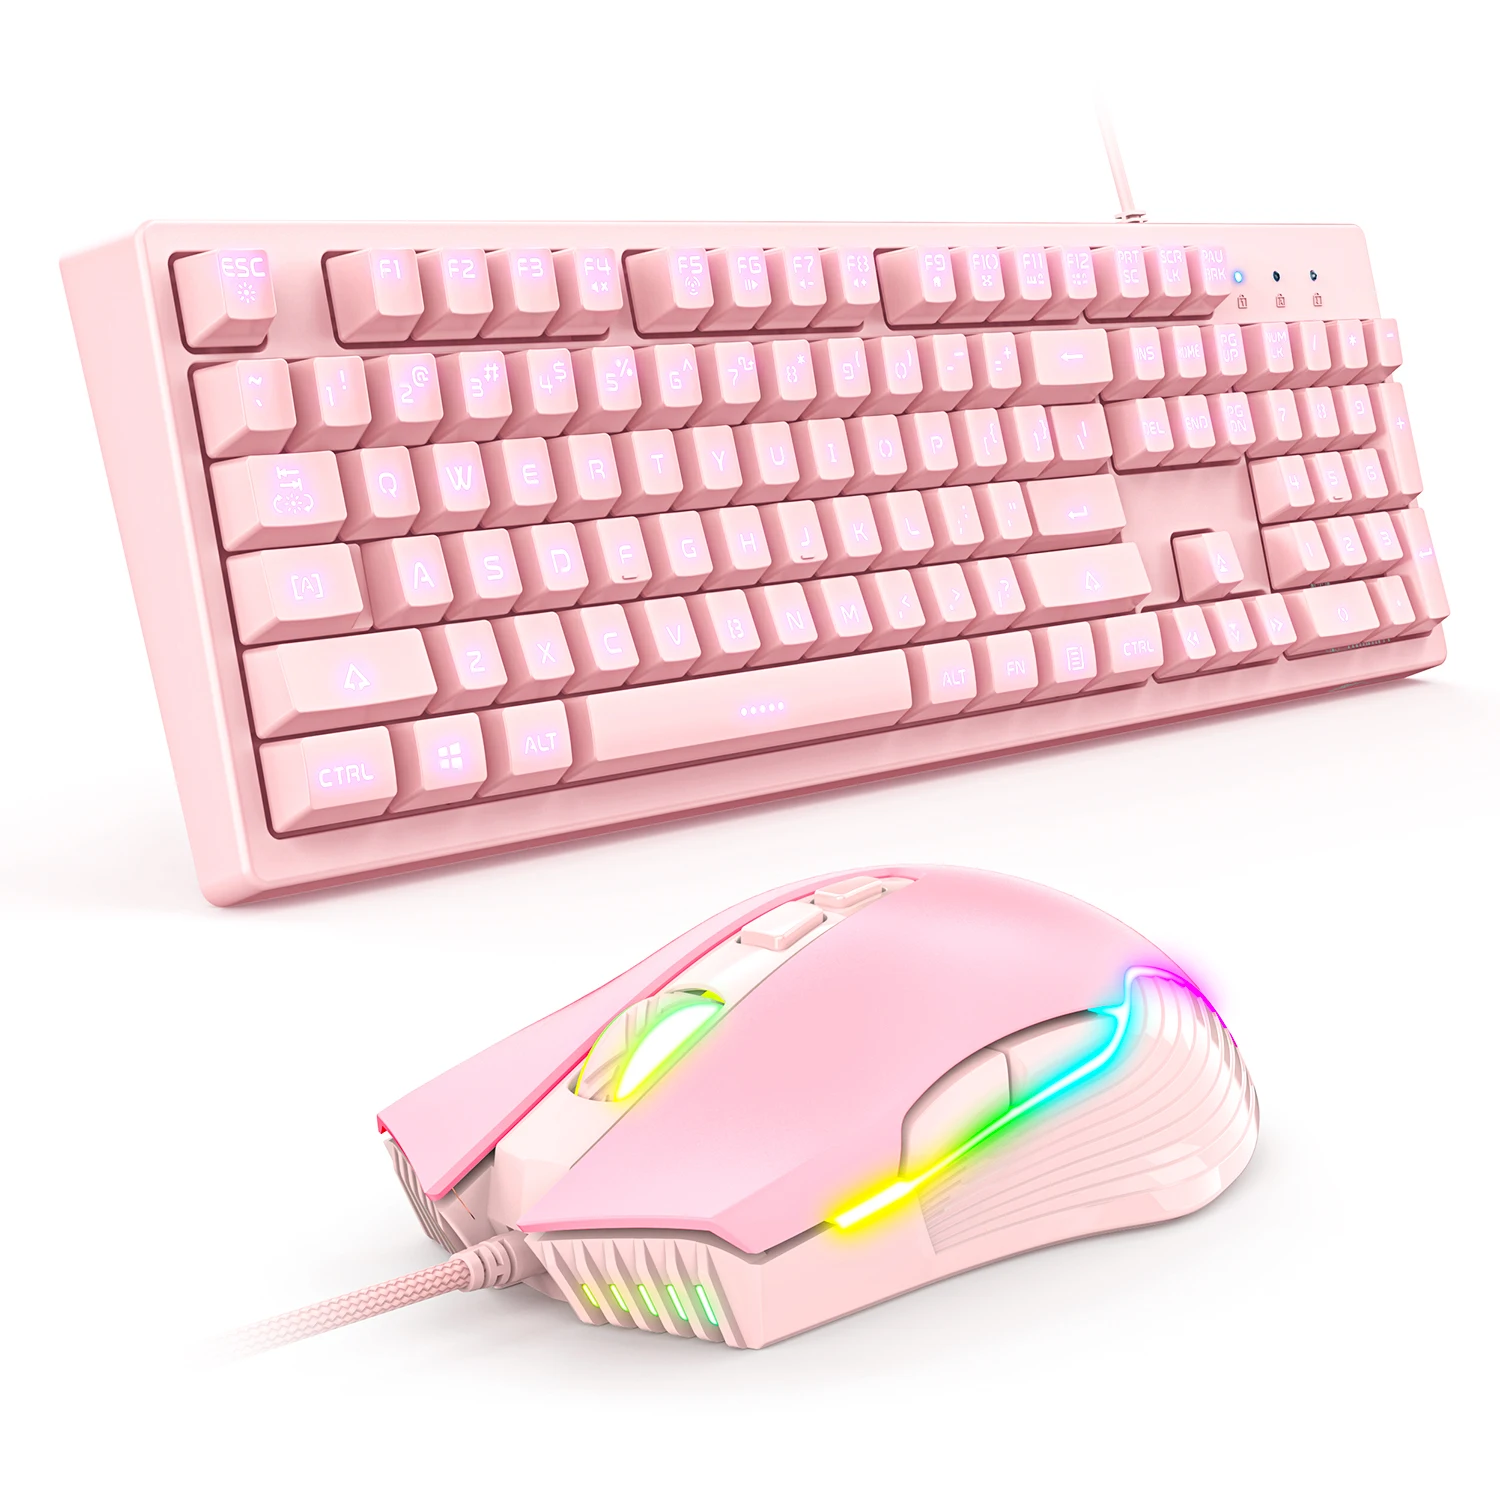 

ONIKUMA G25 RGB Mechanical Gaming Keyboard Mouse Set Wired Pink CW905 6400 DPI Mice K9 Cute Cat Ear Headset for PC Laptop